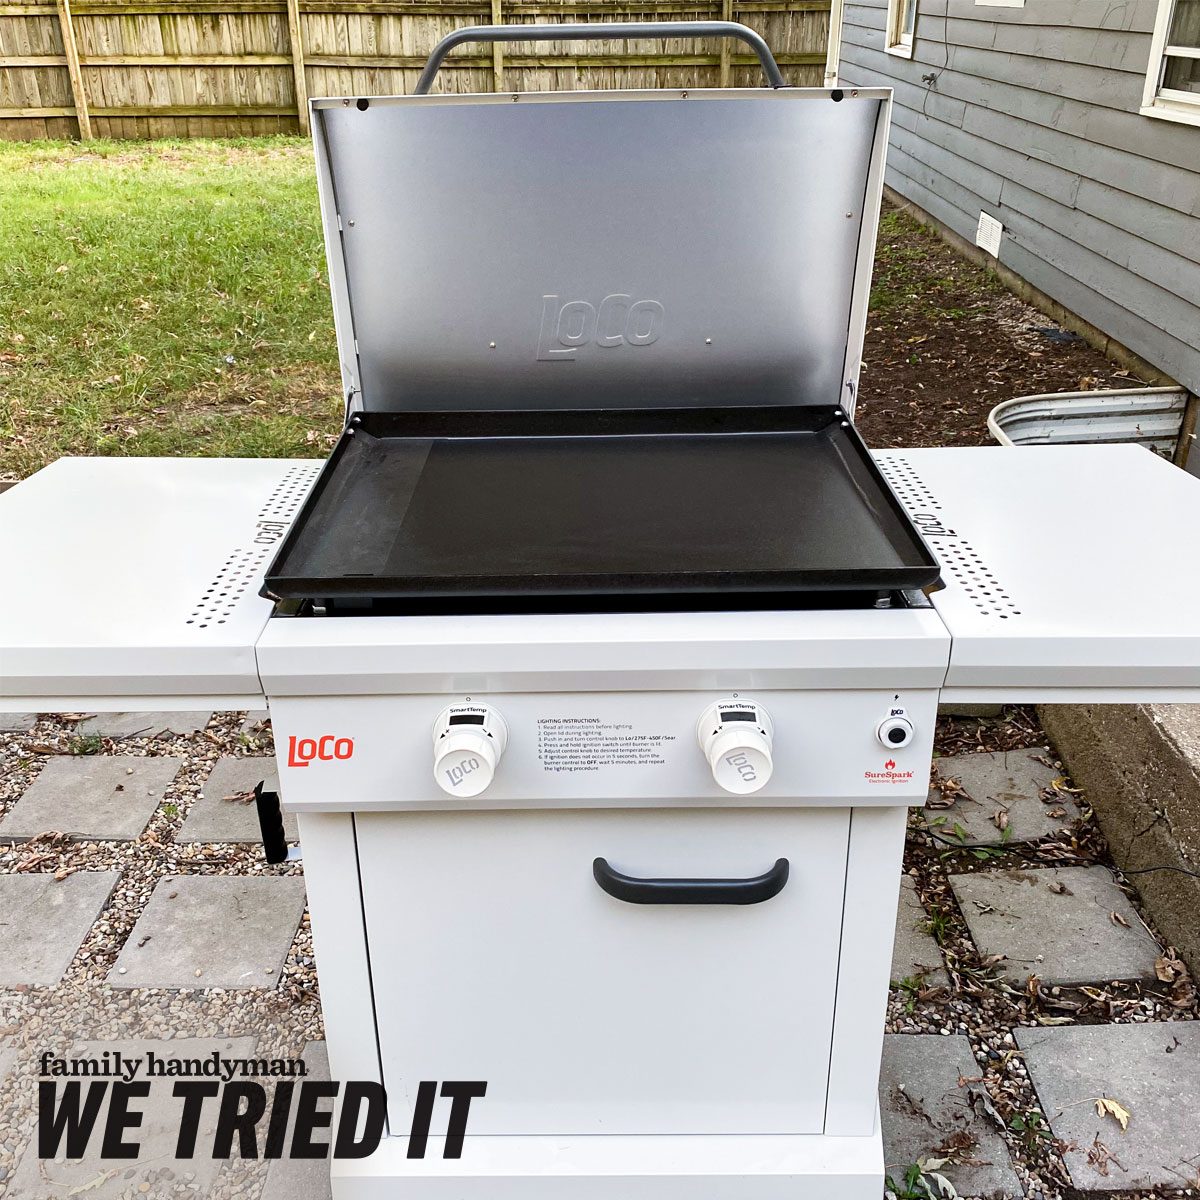 Professional Range Built-In Griddles vs. Grills: Which is Better?